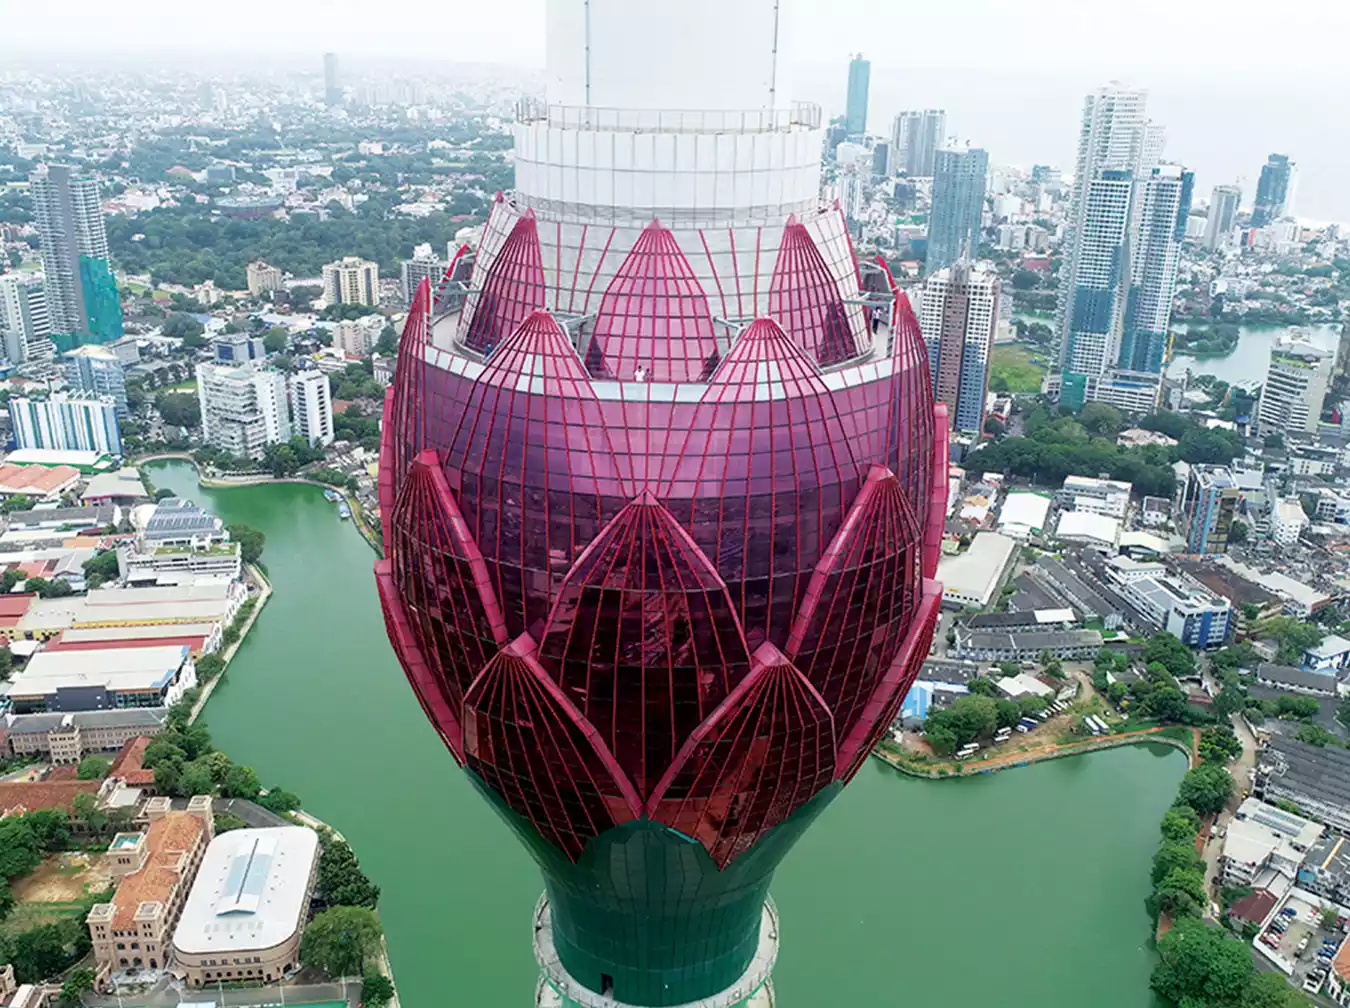 Lotus Tower is one of the newest attractions in Colombo